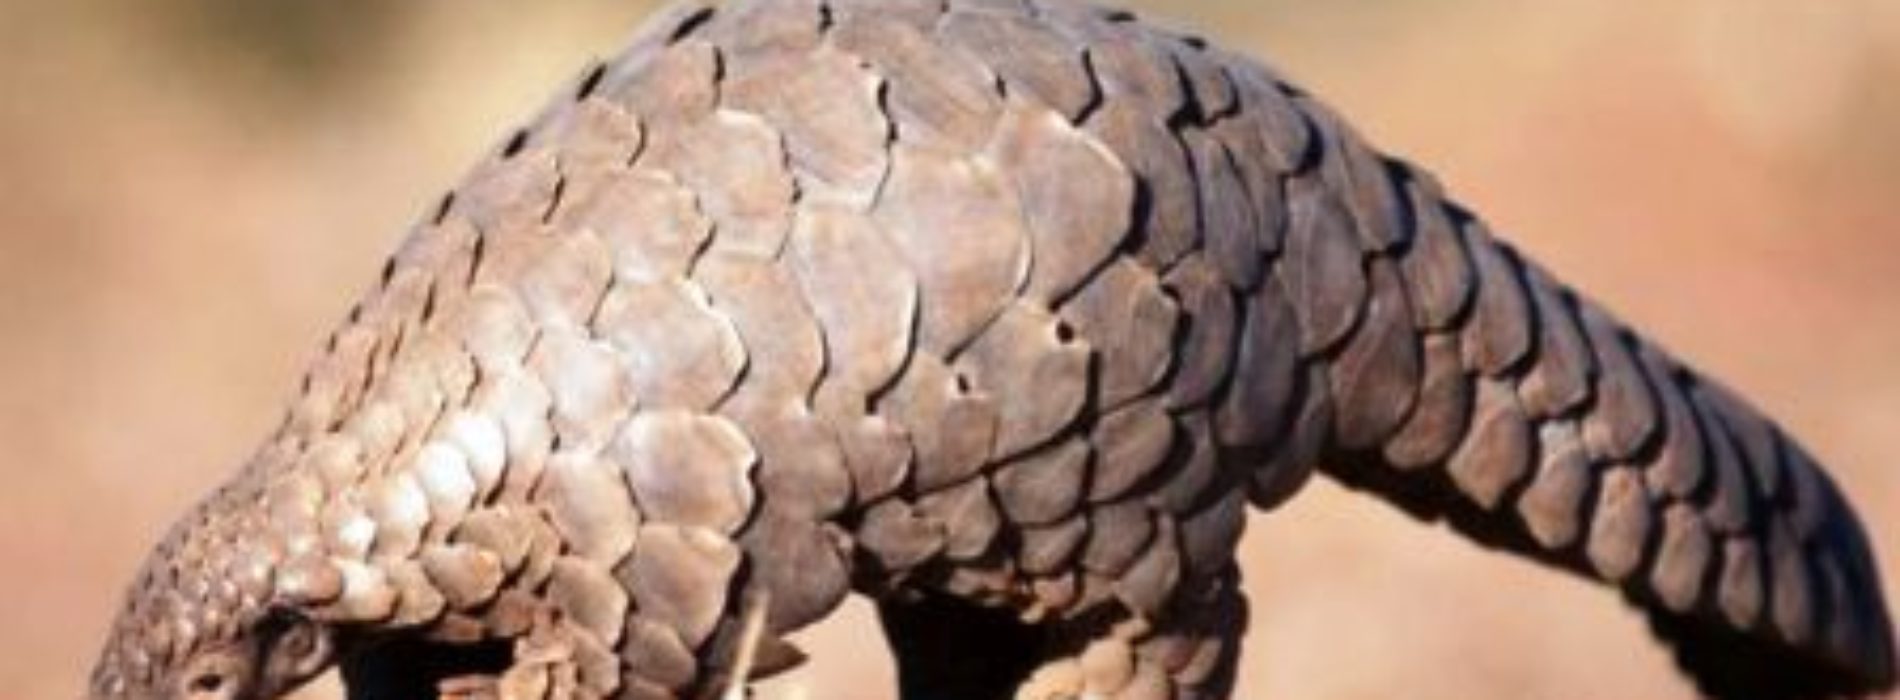 Illegal wildlife trade must stop, UNODC urges on International Mother Earth Day